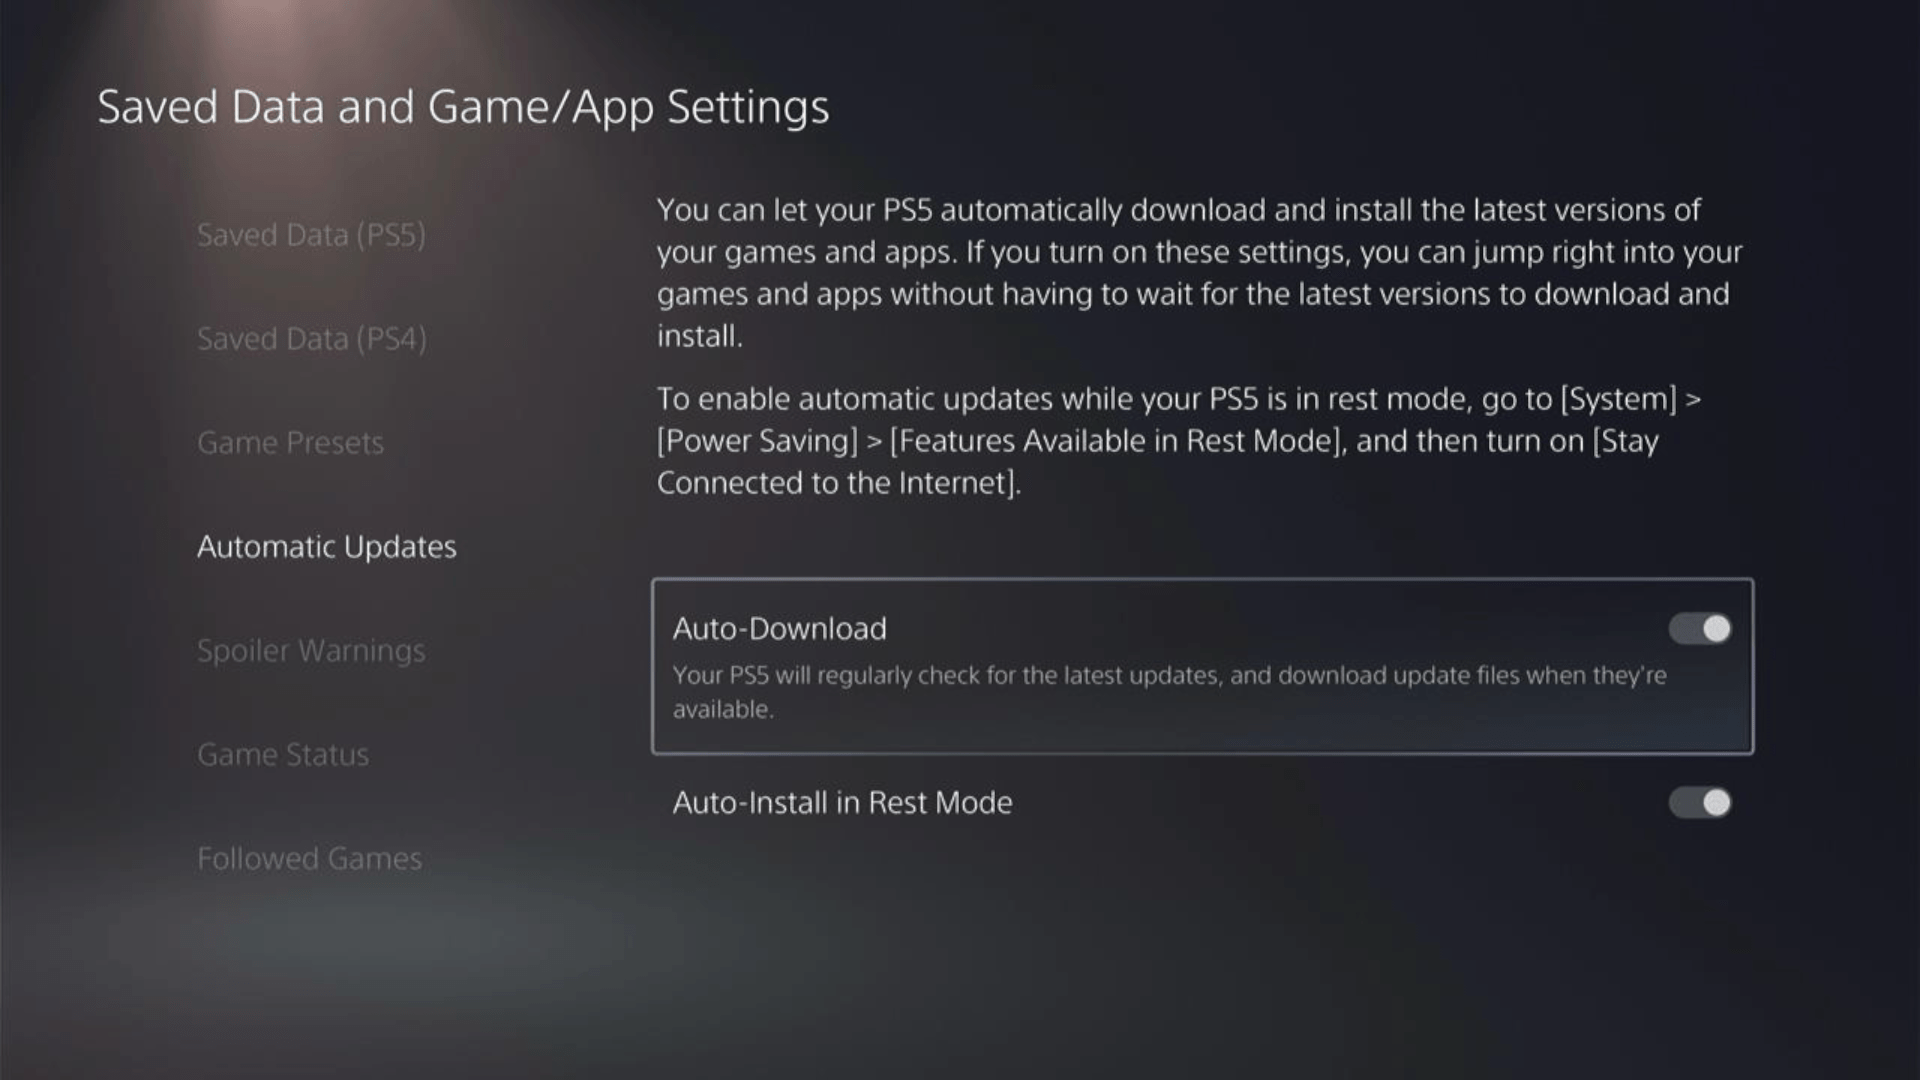 In the Saved Data and Game/App Settings window, select Automatic Updates from the left sidebar to enable automatic game updates to avoid Error Weasel